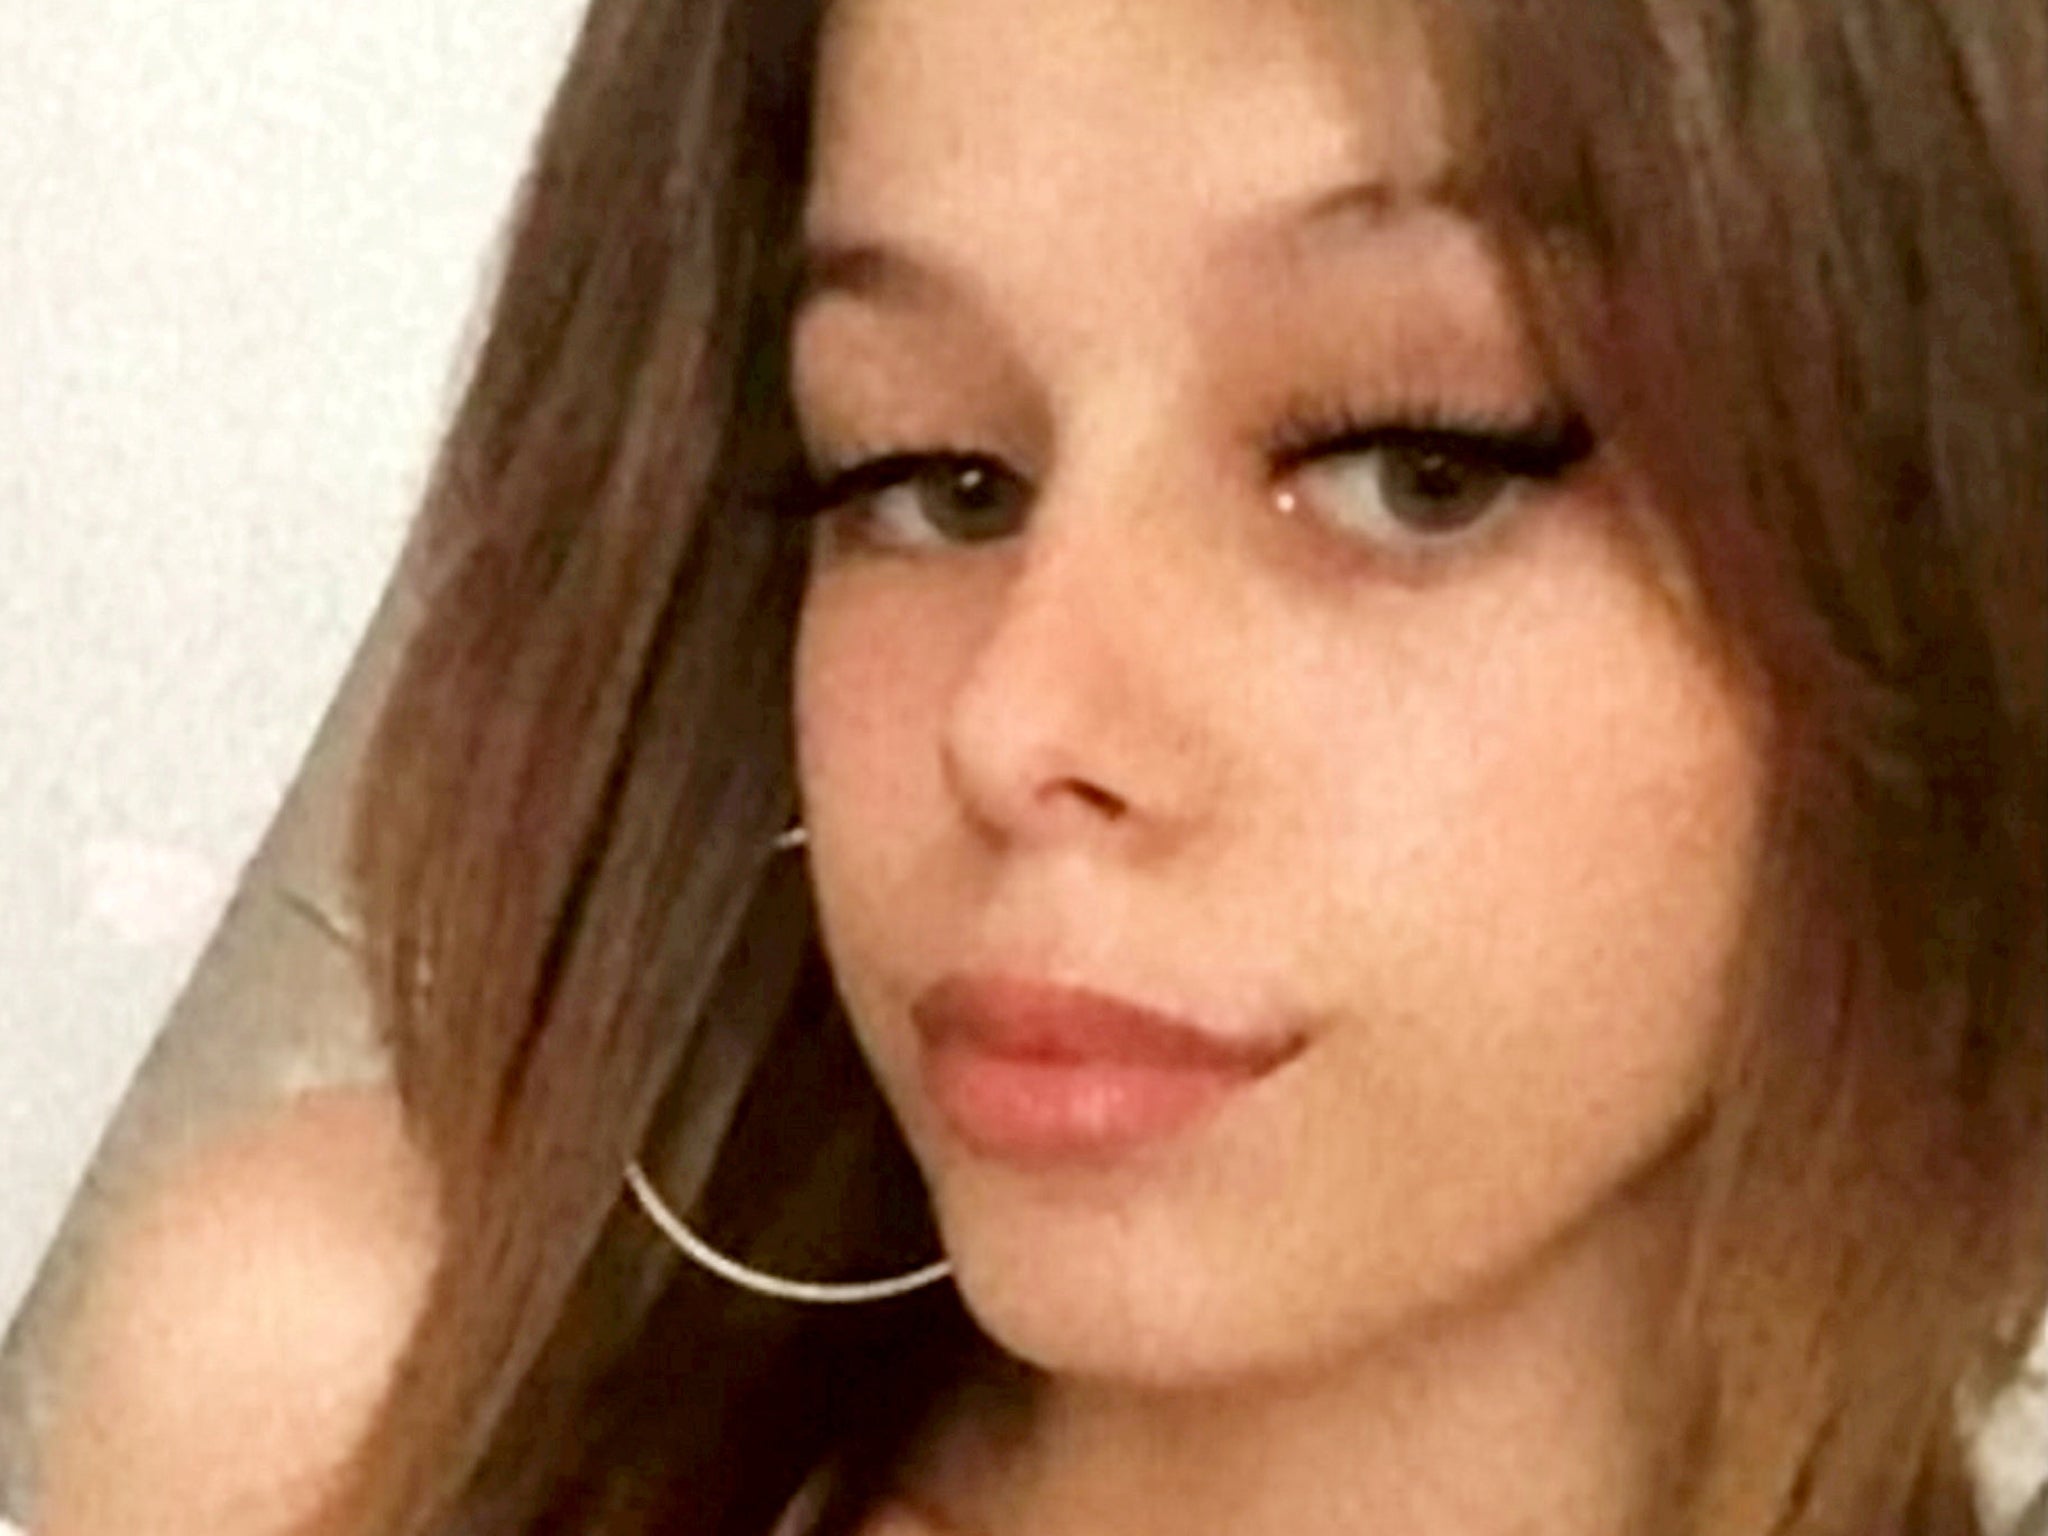 Police have been given more time to question a 24-year-old man on suspicion of the murder of Bobbi-Anne McLeod, 18, who went missing in Plymouth